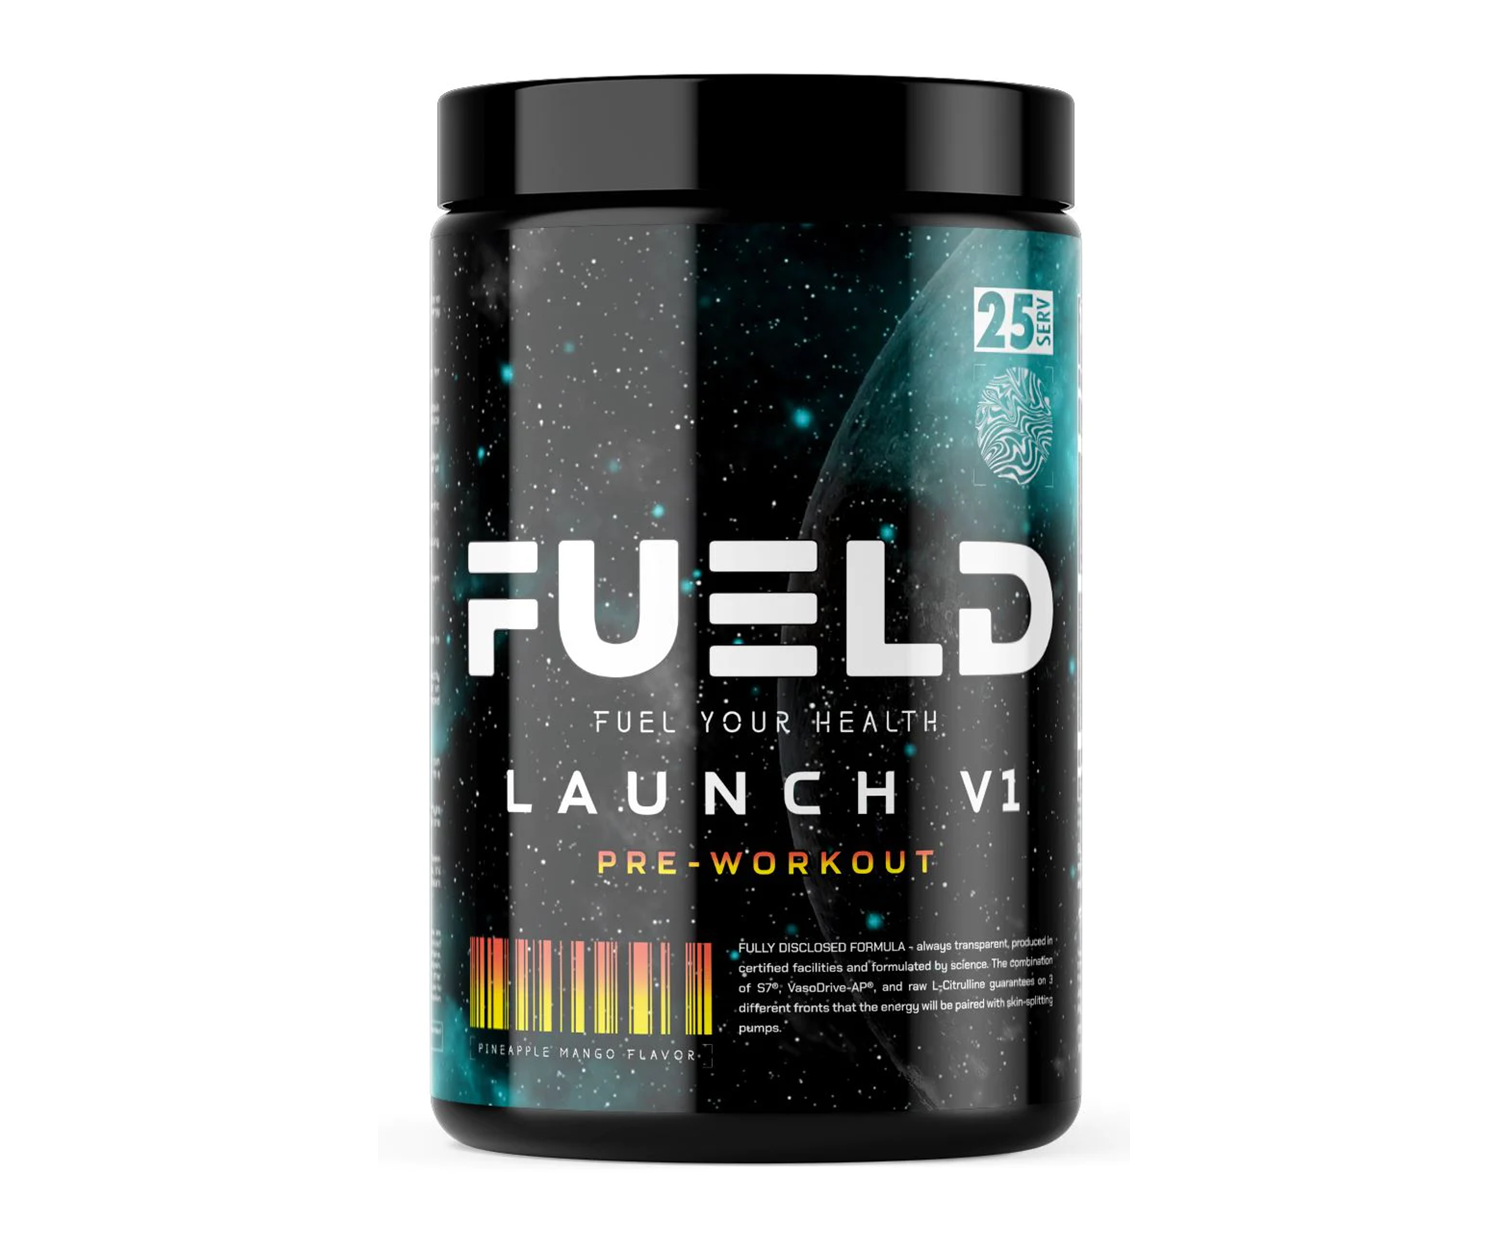 FUELD Launch V1 Pre-Workout, (Pineapple Mango) Insane Energy Blend, Out Of This World Pump Matrix 25/50 servings